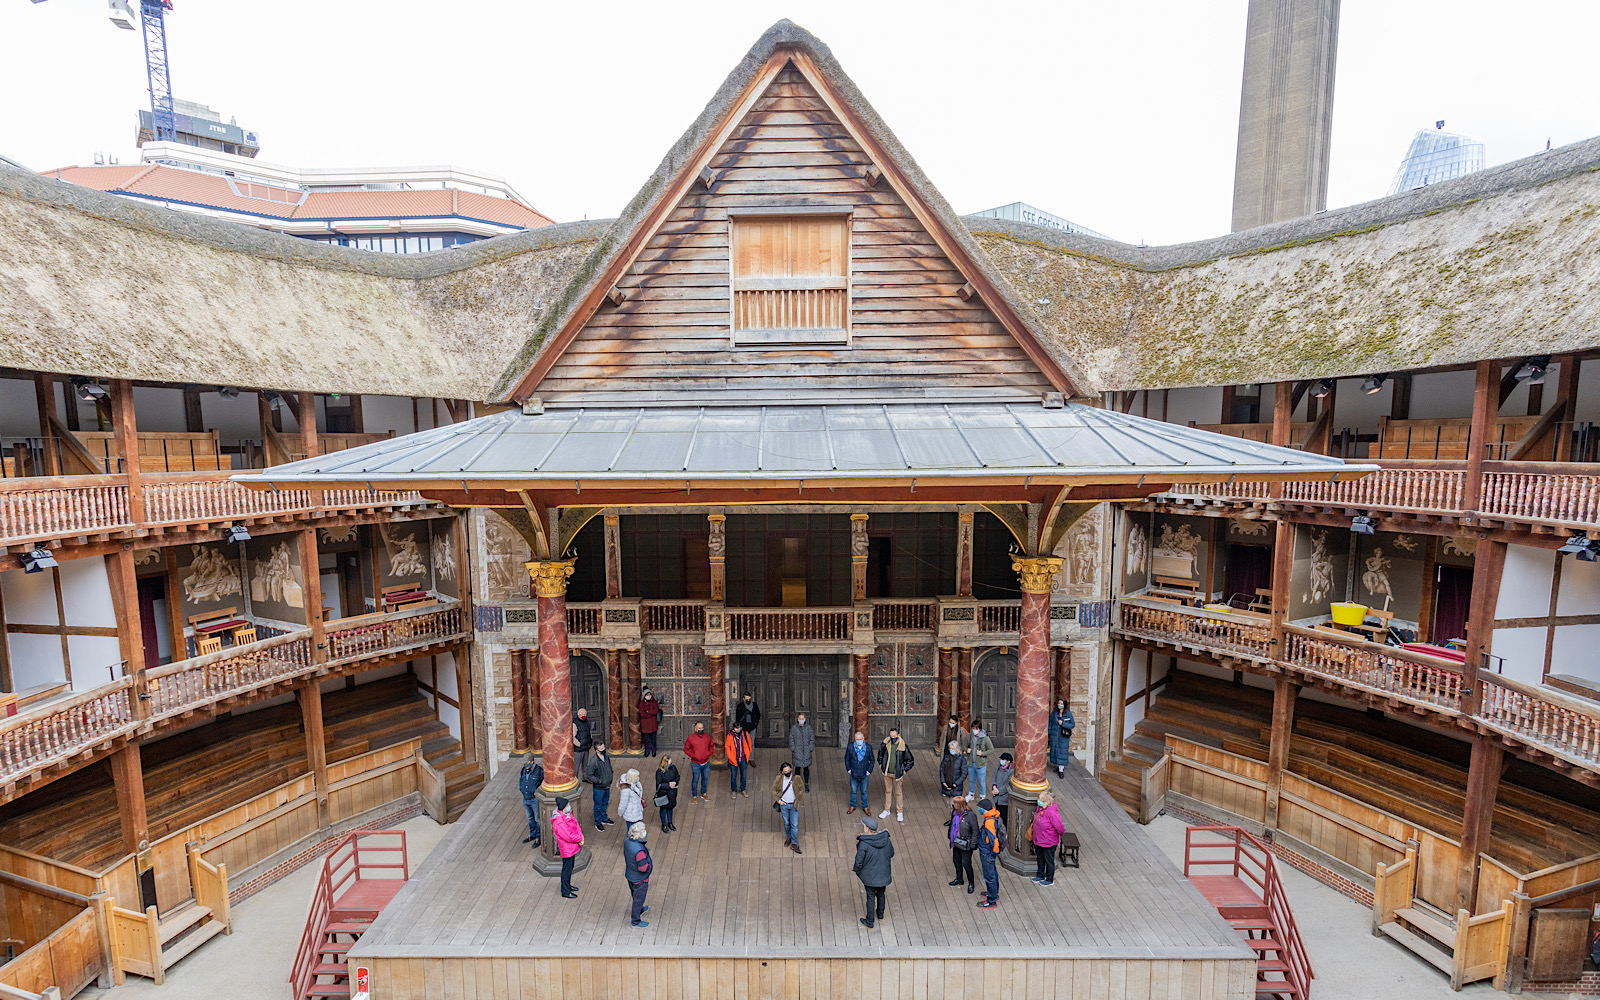 The Globe Theatre stage has a tall triangle roof and is held up by intricately decorated pillars